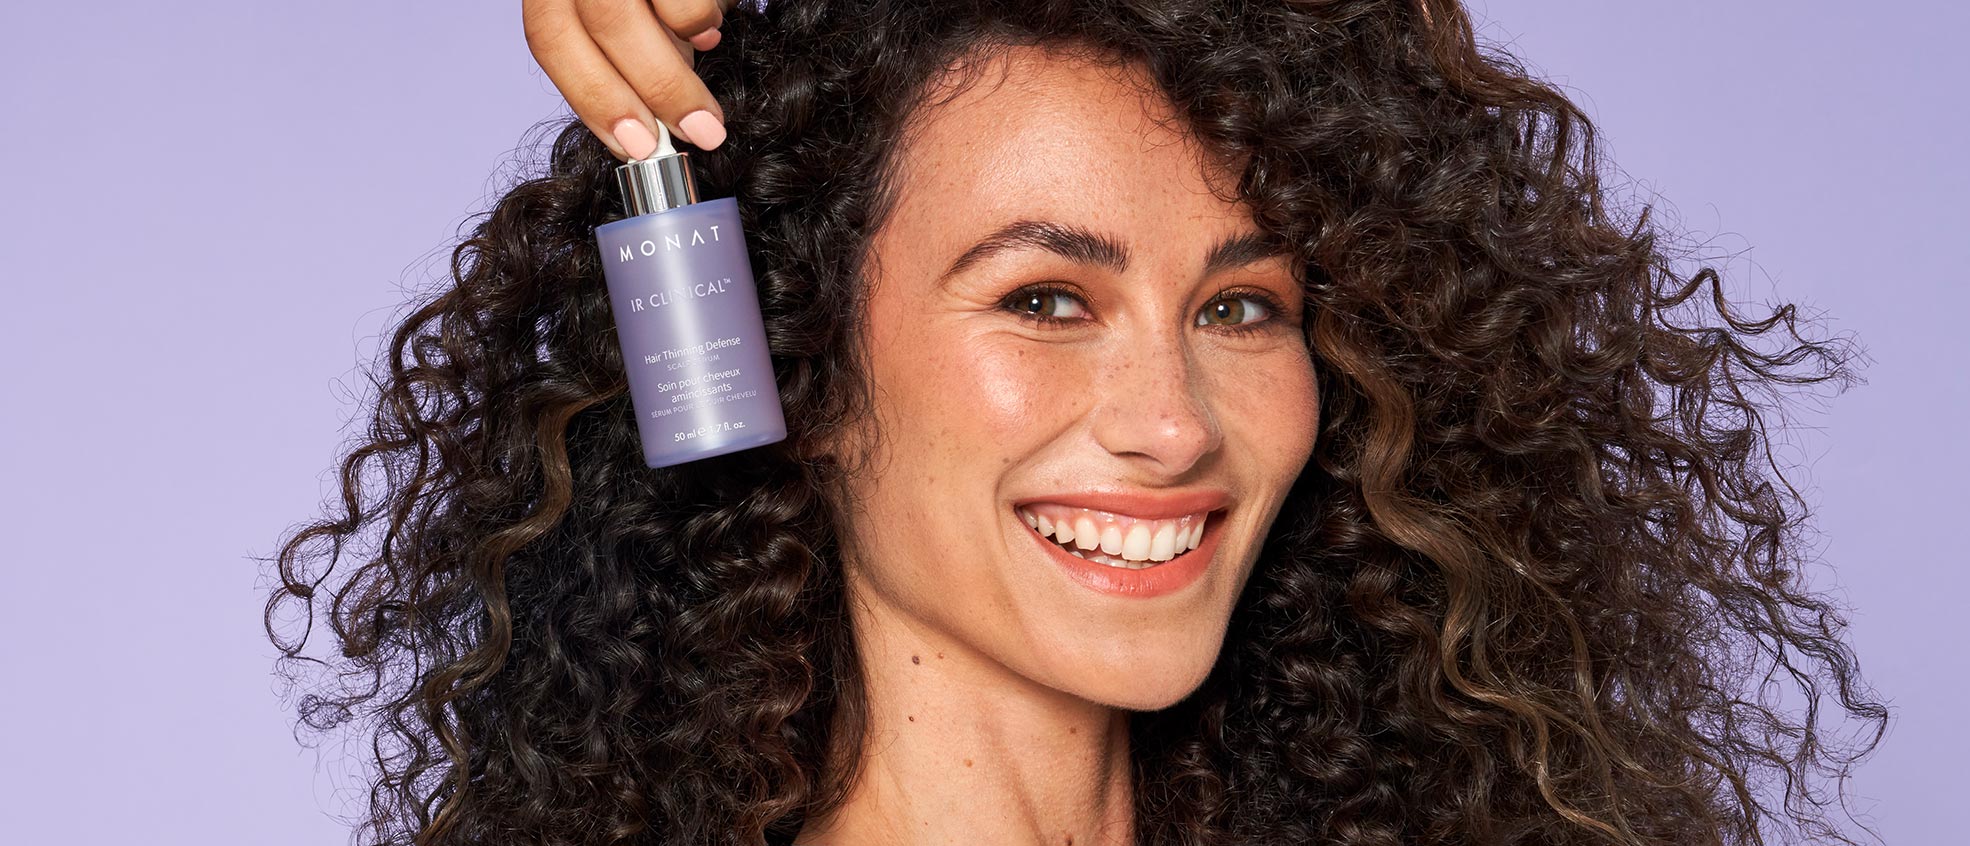 Female with brown curly hair smiling while holding IR Clinical™ Hair Thinning Defense.